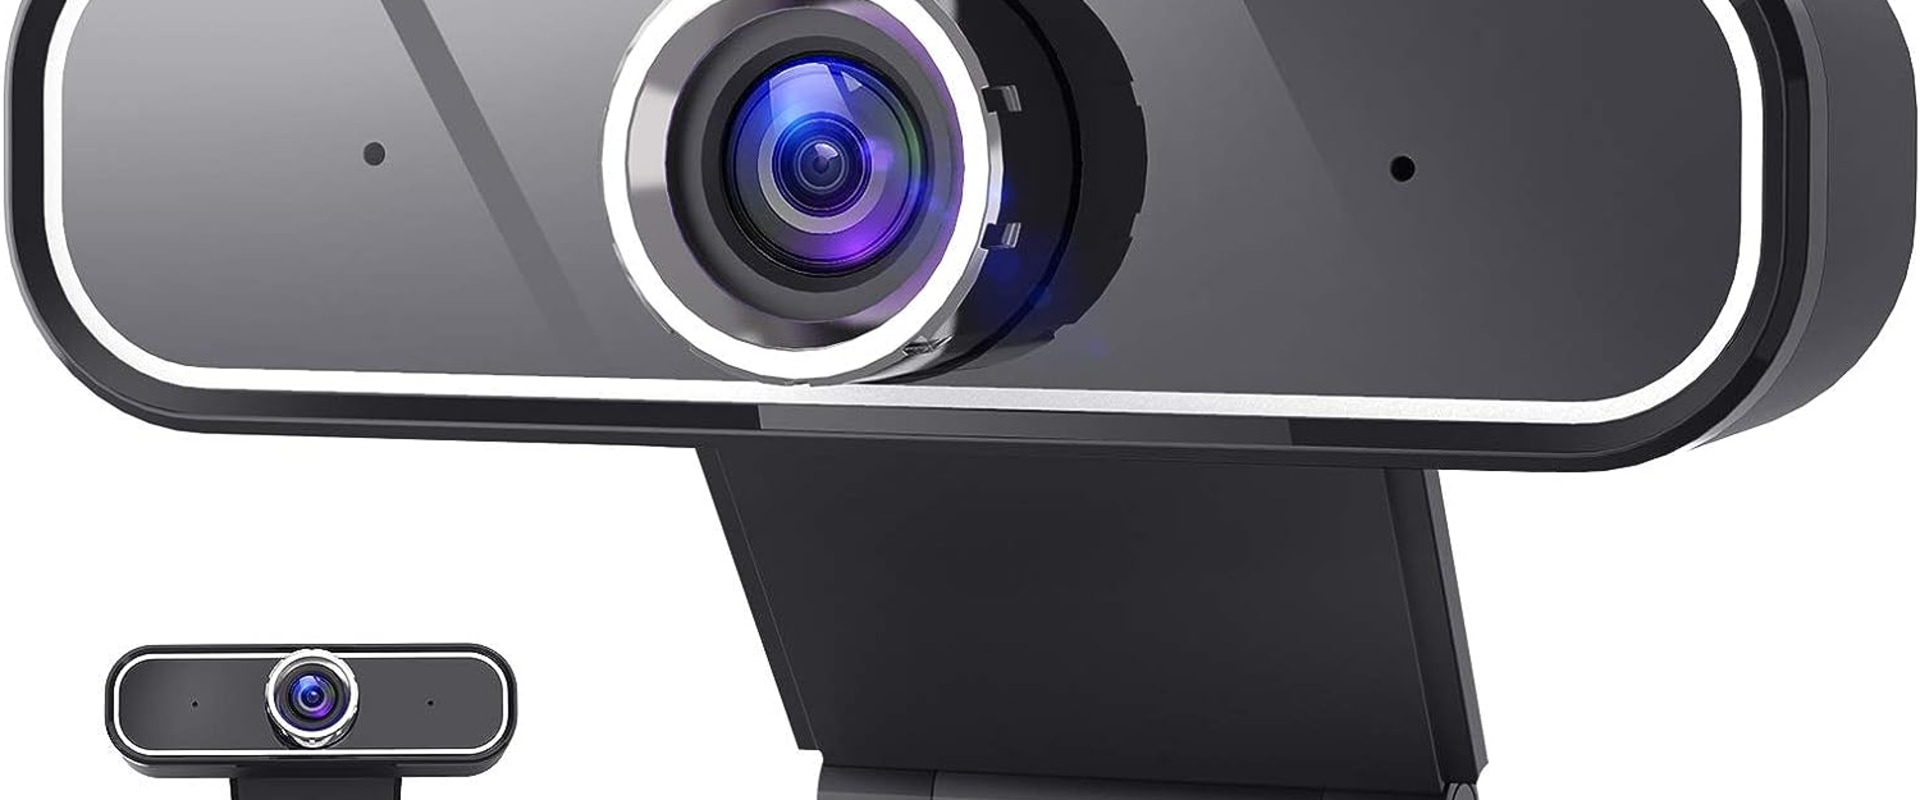 Are Webcams Compatible with All Computers and Laptops?